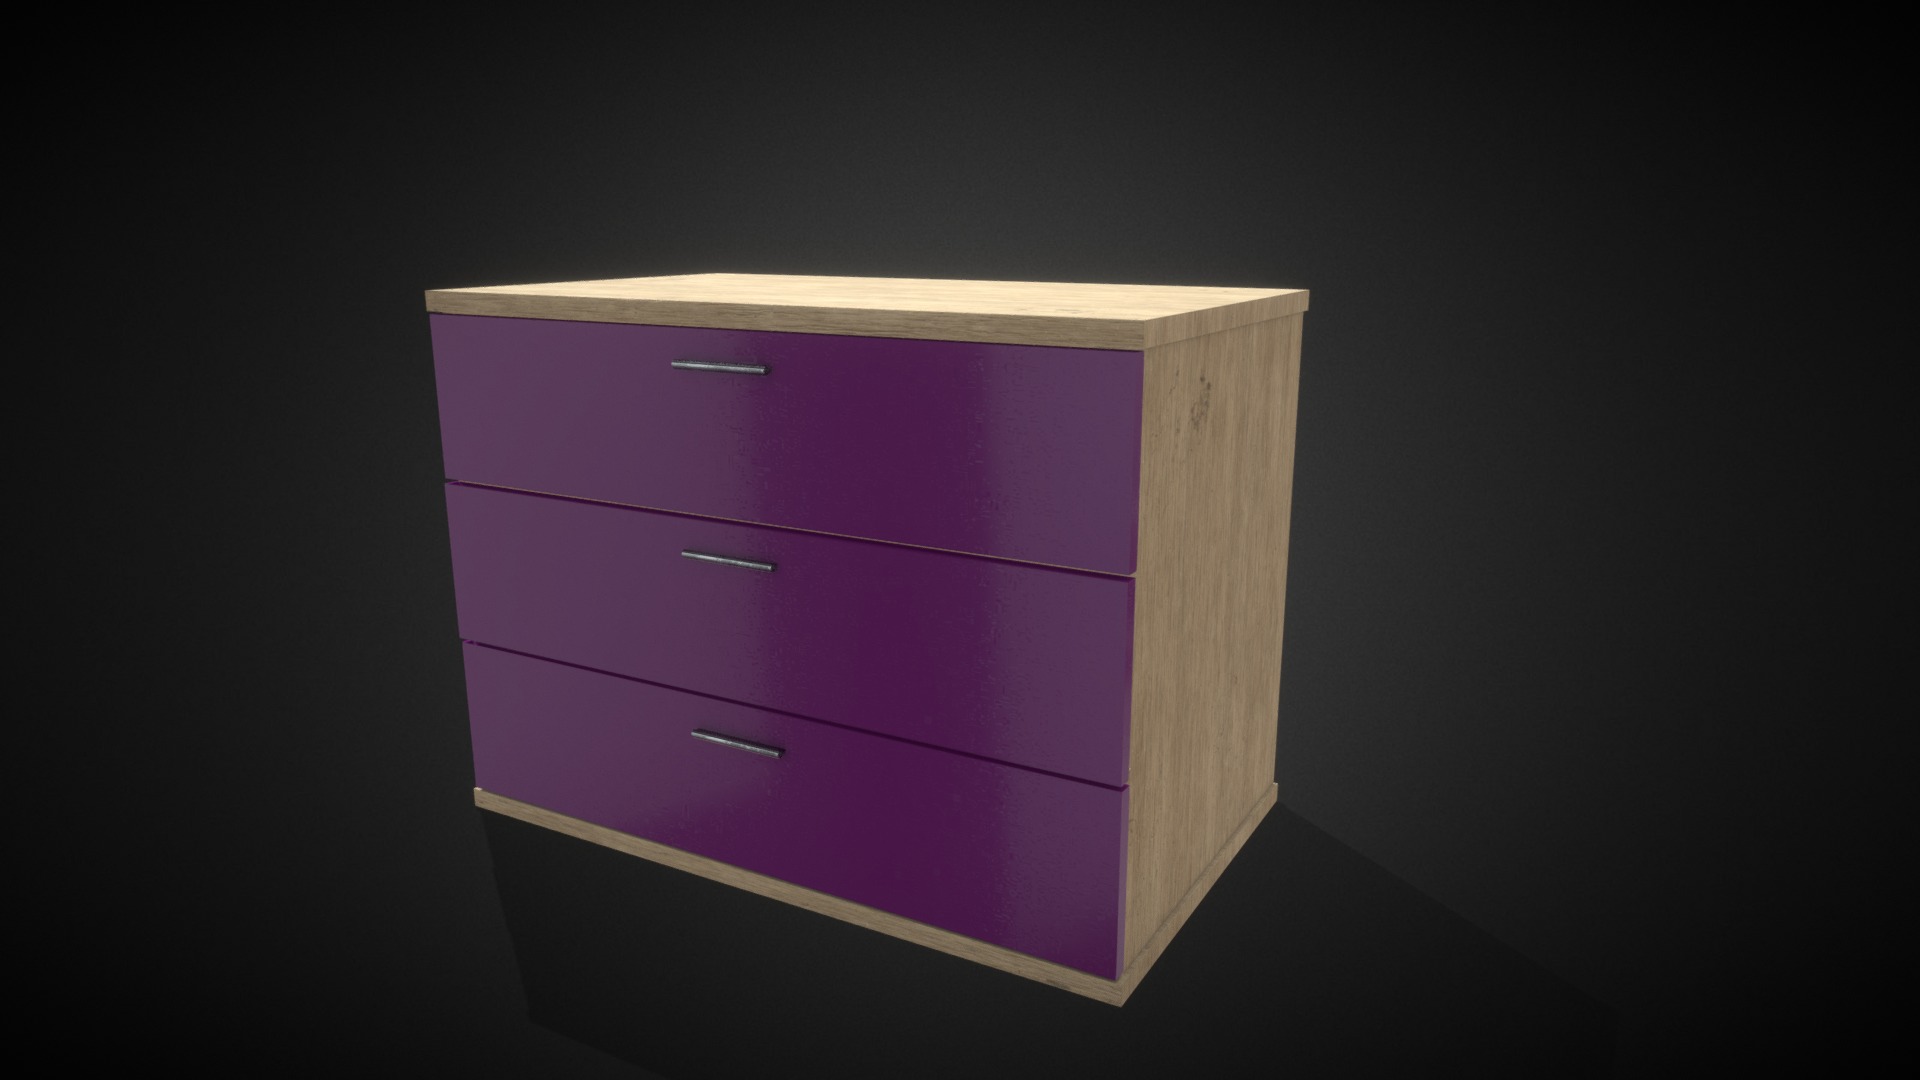 3D model Commode – Dresser - This is a 3D model of the Commode - Dresser. The 3D model is about a purple file cabinet.